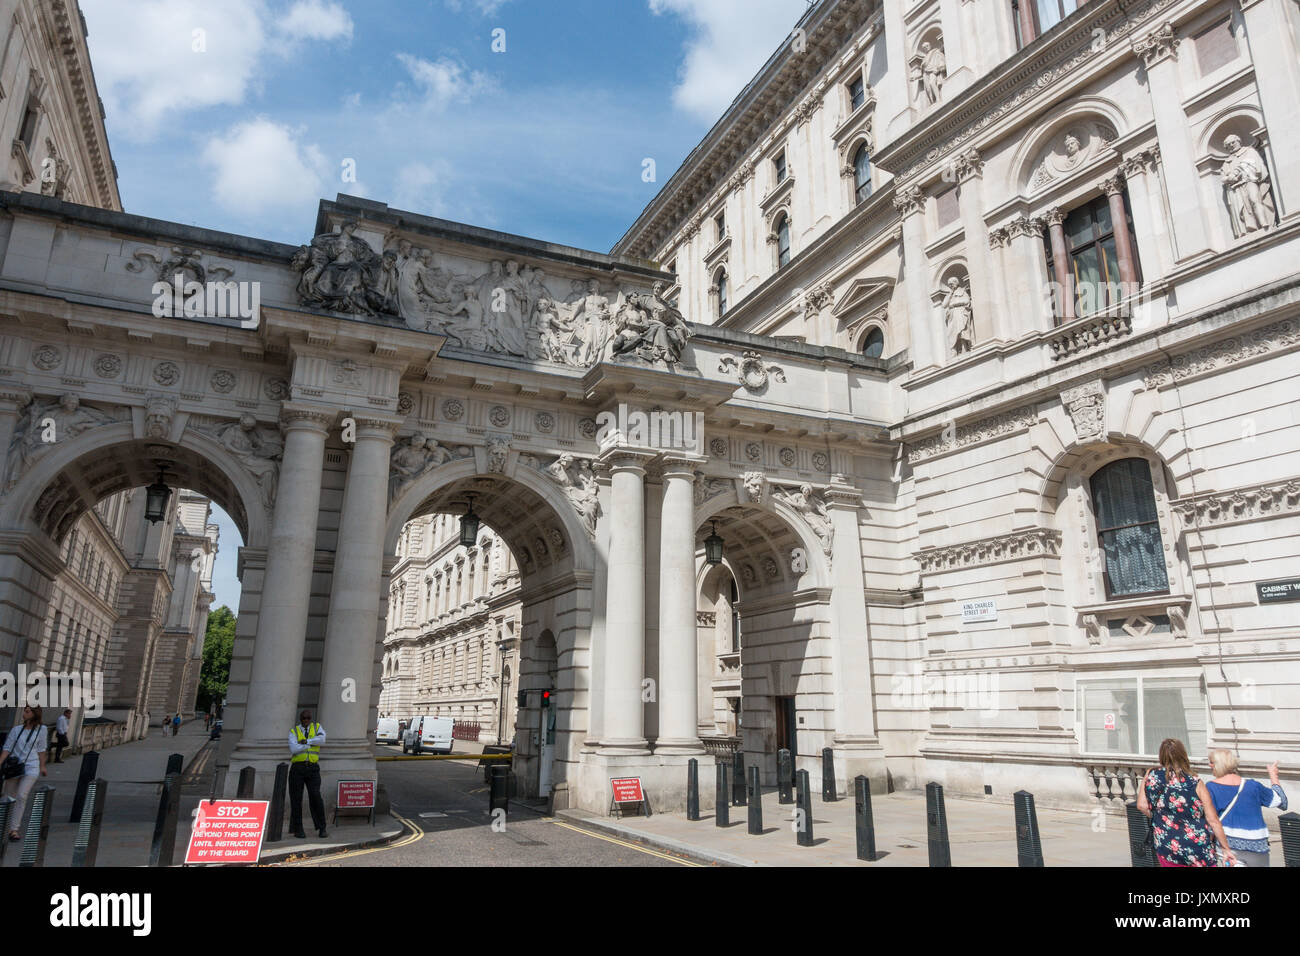 Security man standing near the entrance to Downing street, Whitehall, Westminster, London, SW1A 2AS, UK Stock Photo